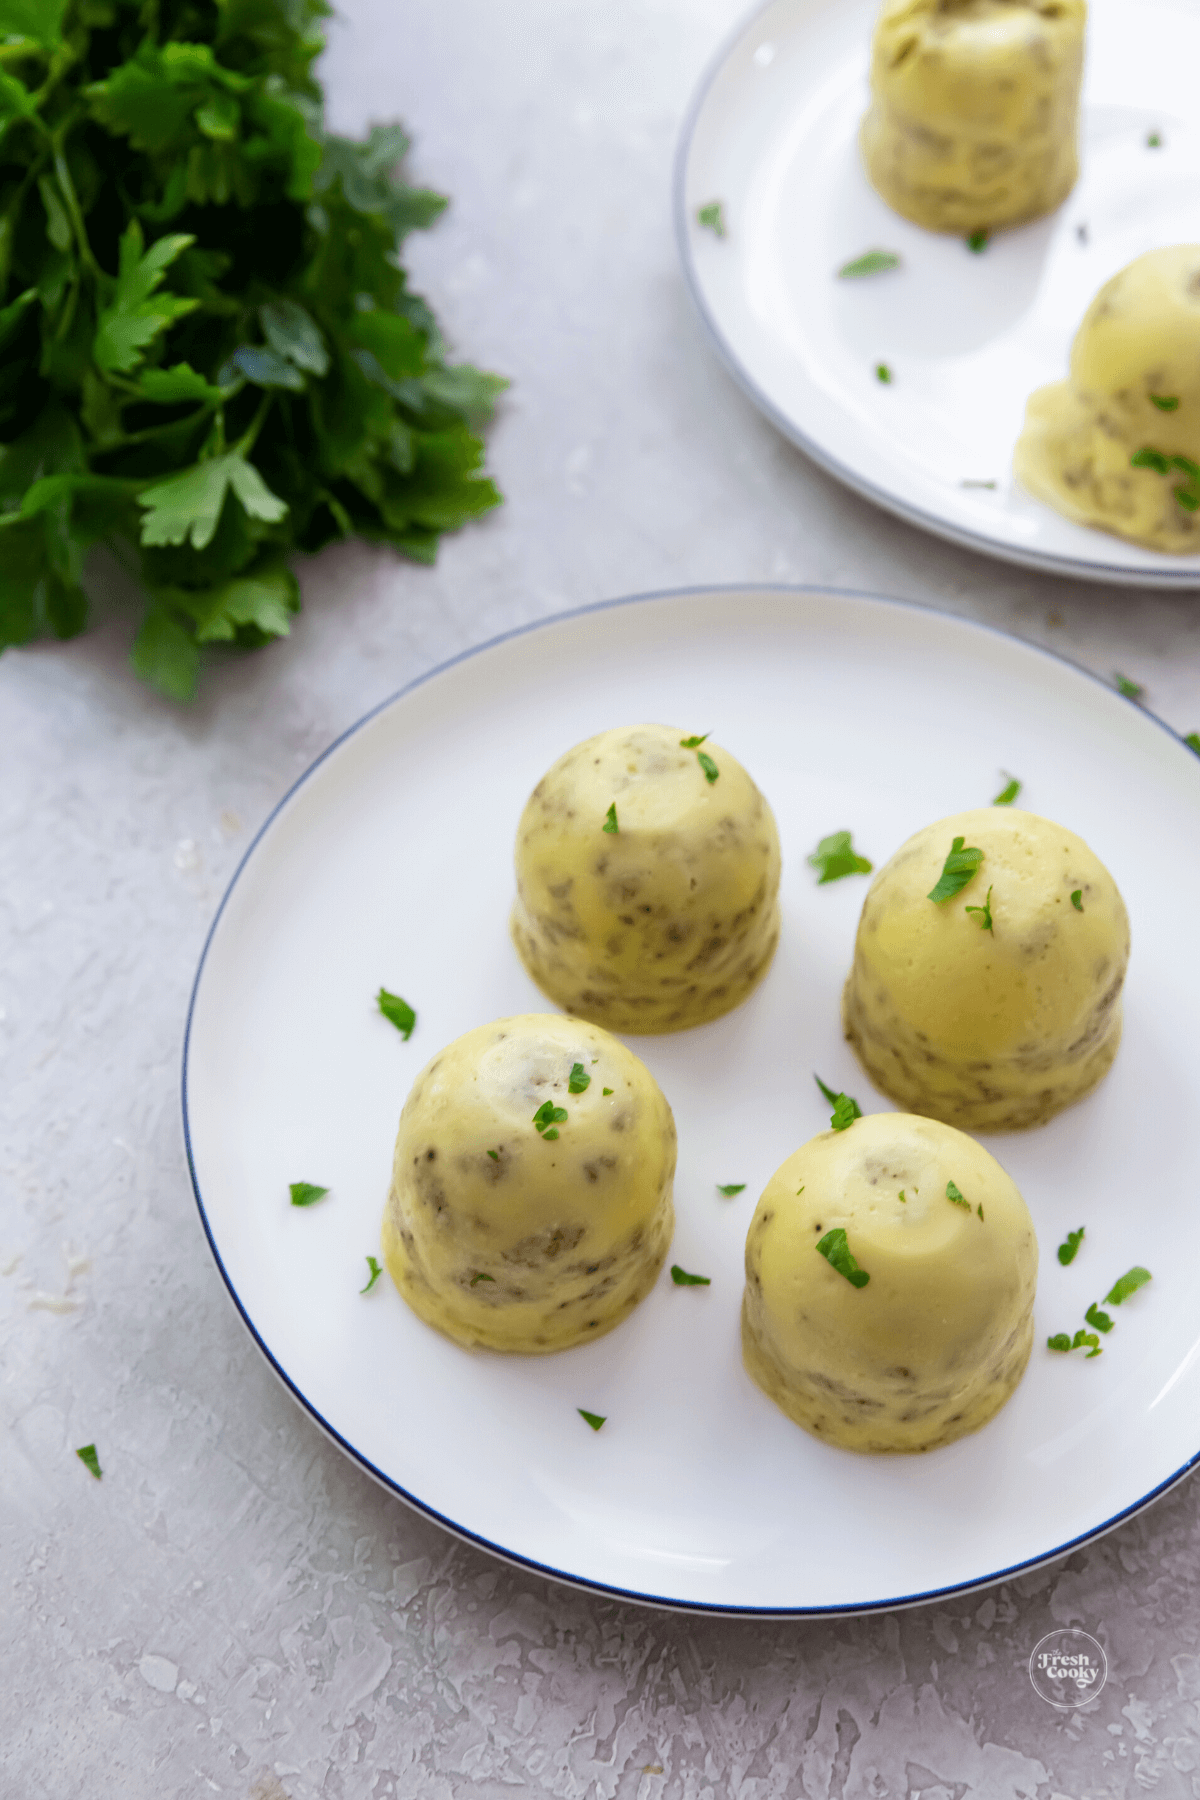 Egg bites on plates with some fresh parsley nearby.